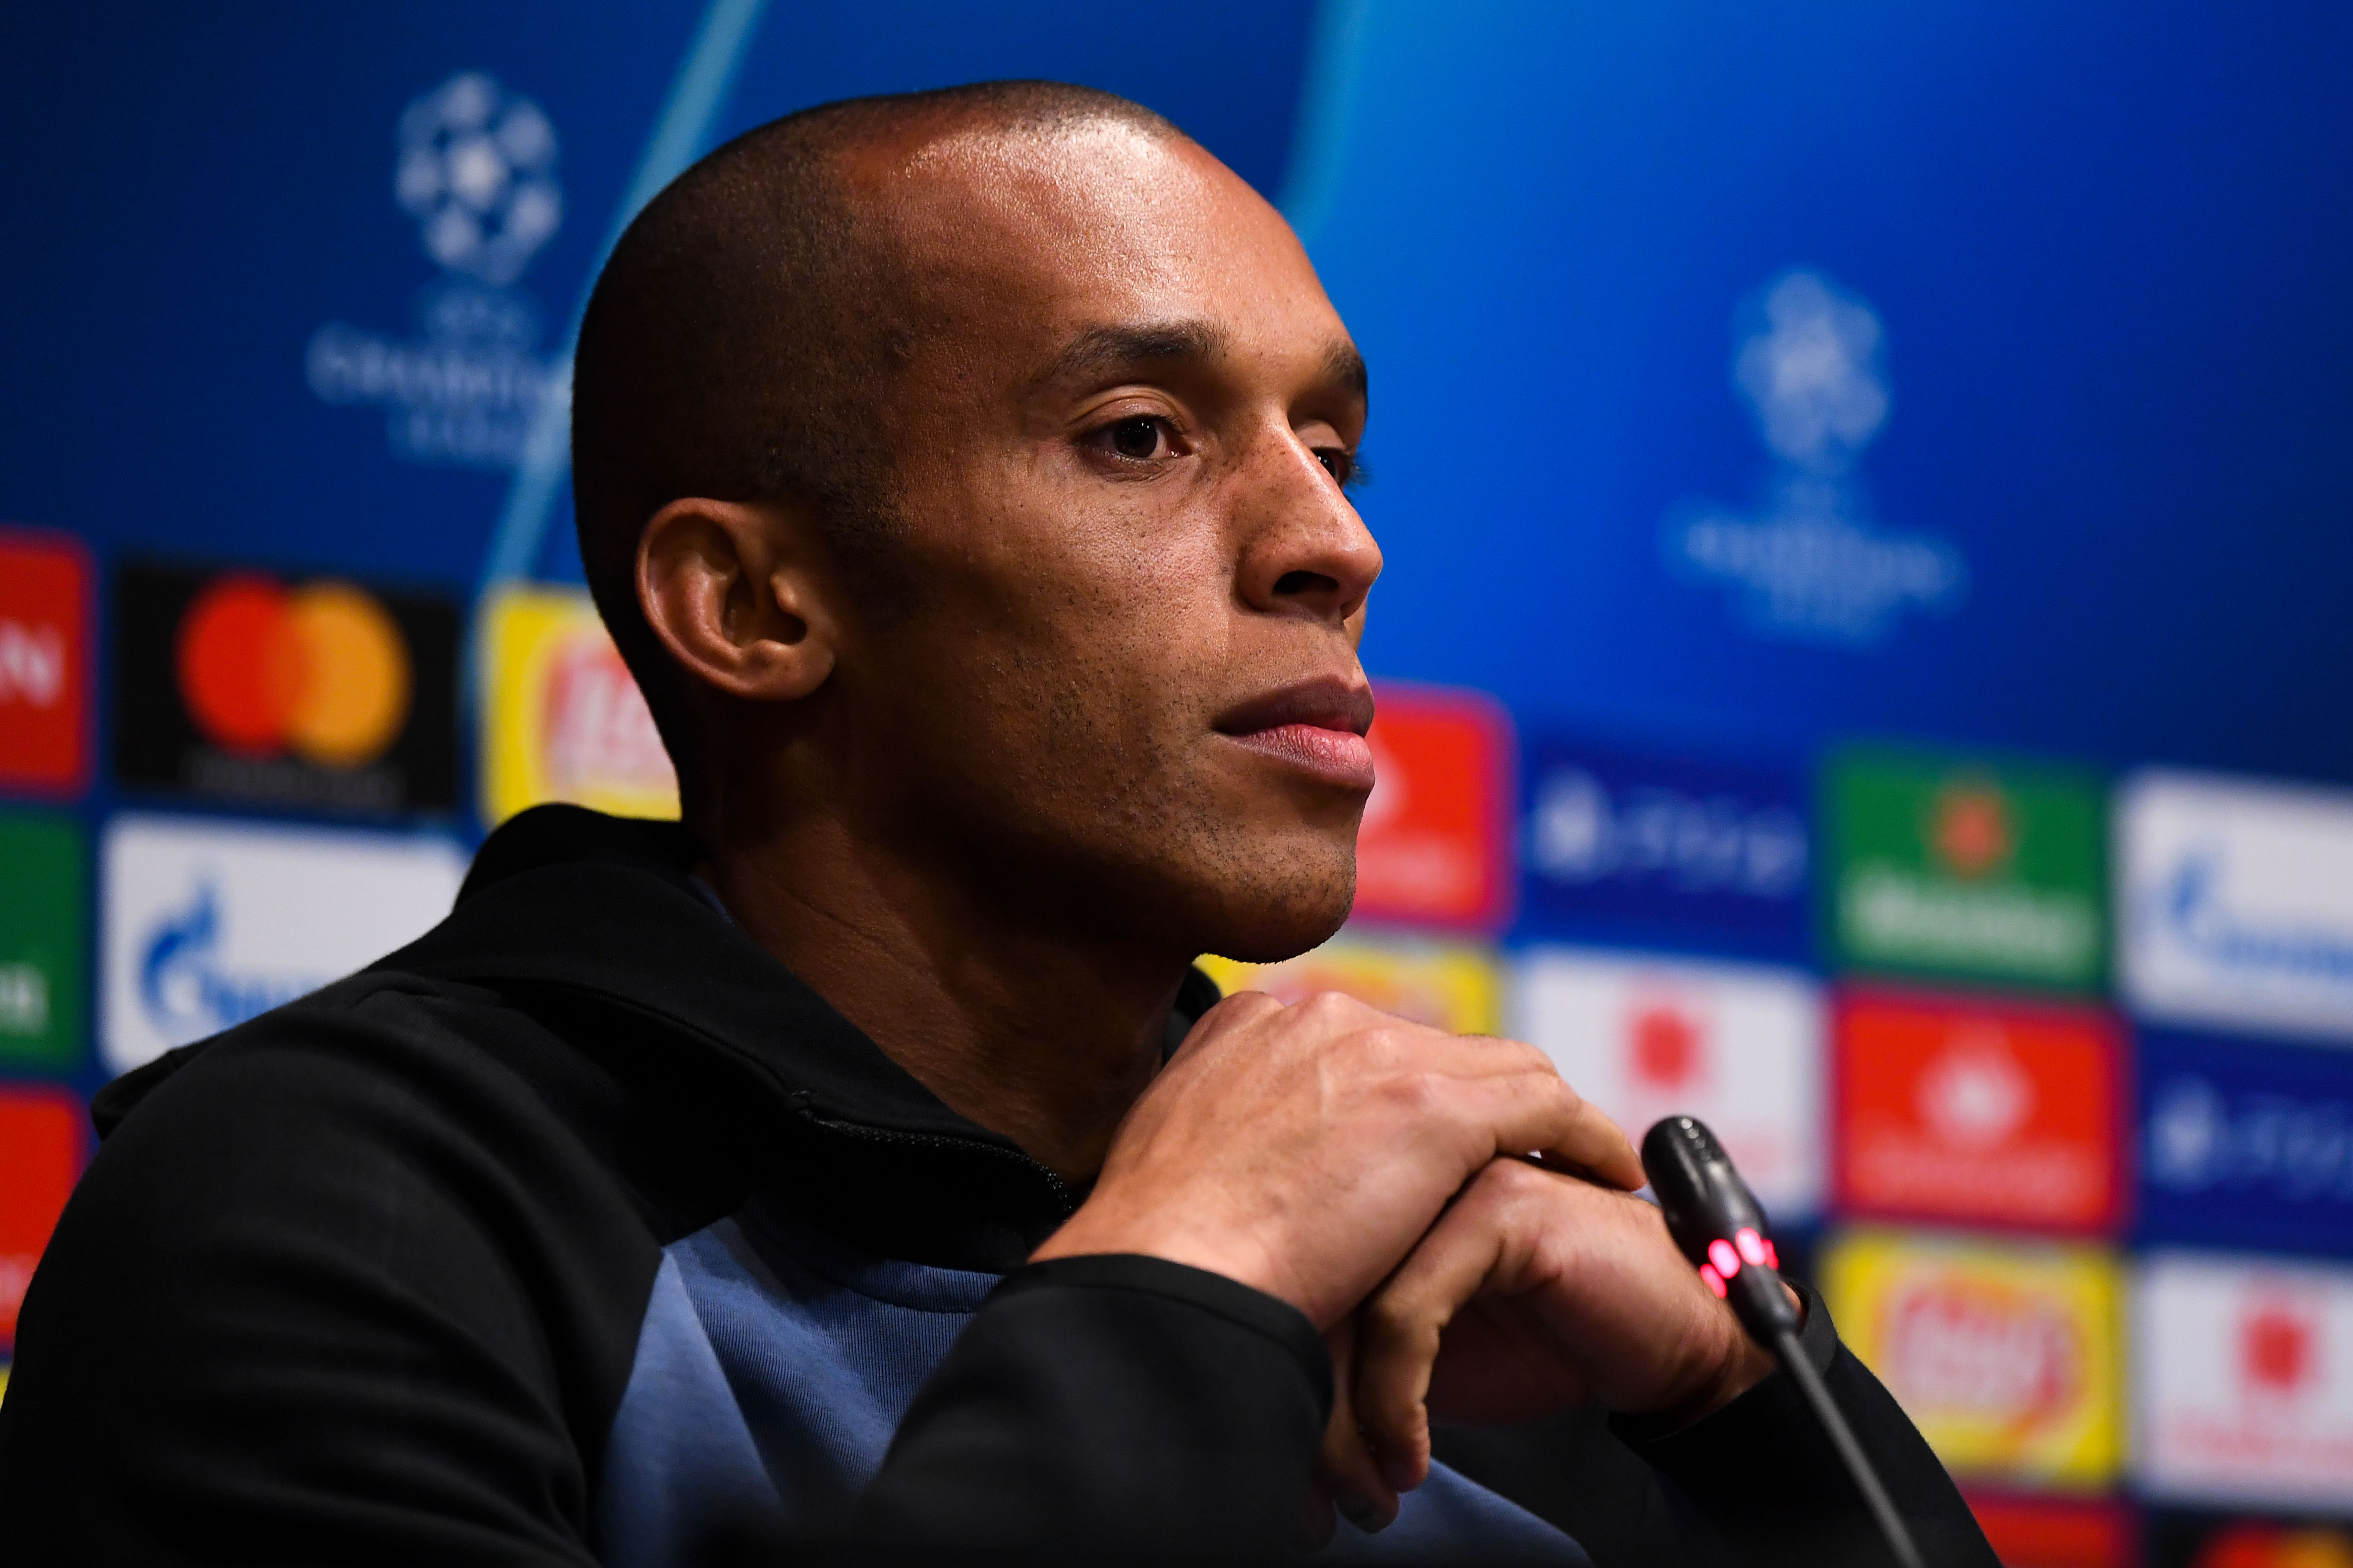 BARCELONA, SPAIN - OCTOBER 23:  Joao Miranda of FC Internazionale faces the media during a press conference ahead of the UEFA Champions League Group B match between FC Barcelona and FC Internazionale at Camp Nou on October 23, 2018 in Barcelona, Spain.  (Photo by David Ramos/Getty Images)